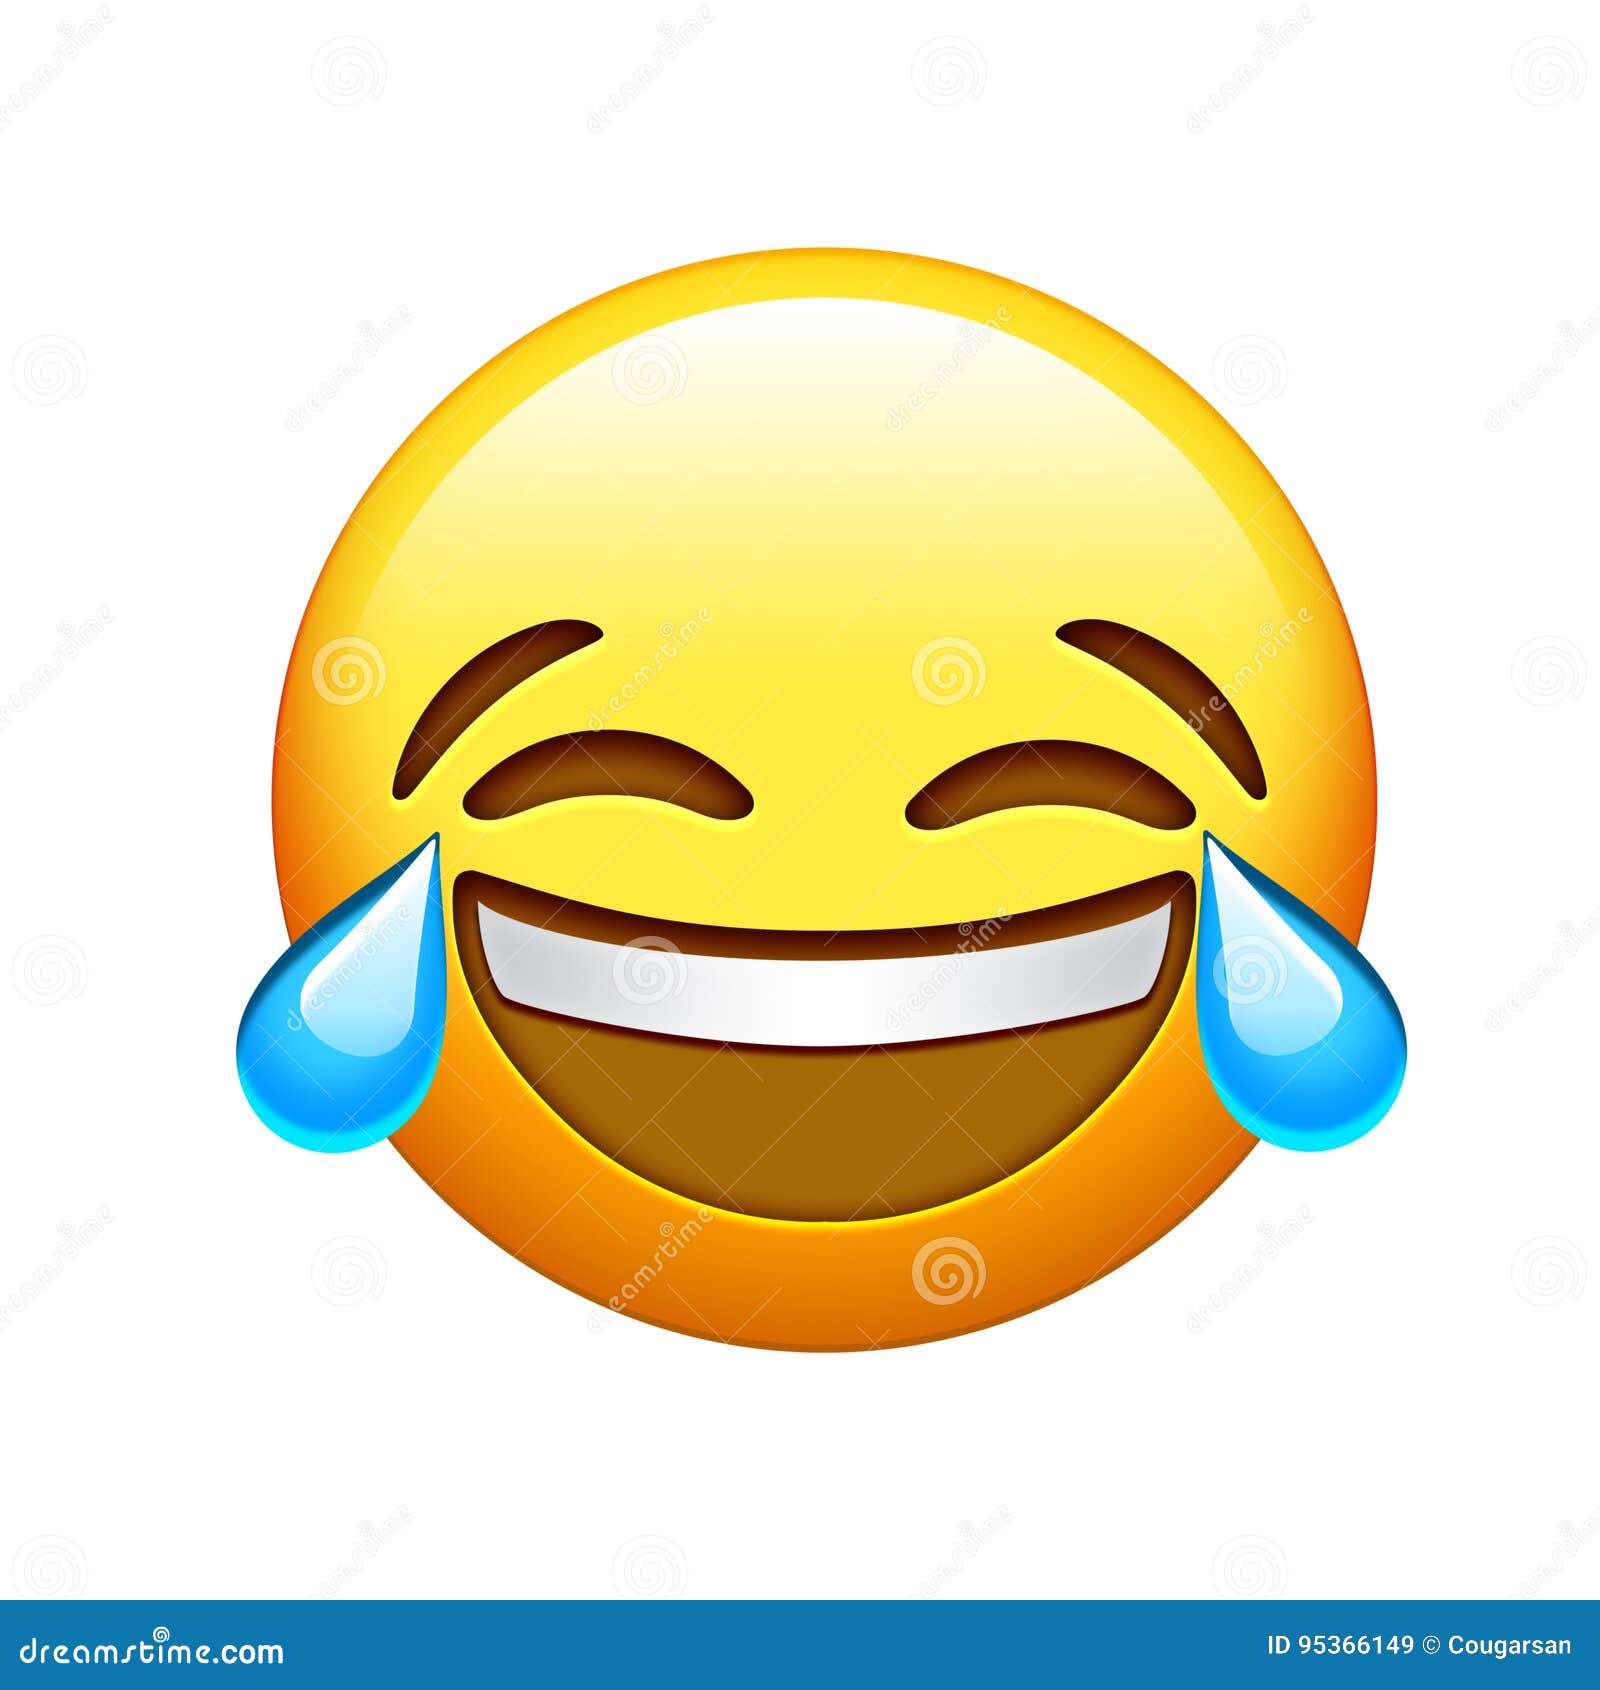 emoji yellow face lol laugh and crying tear icon